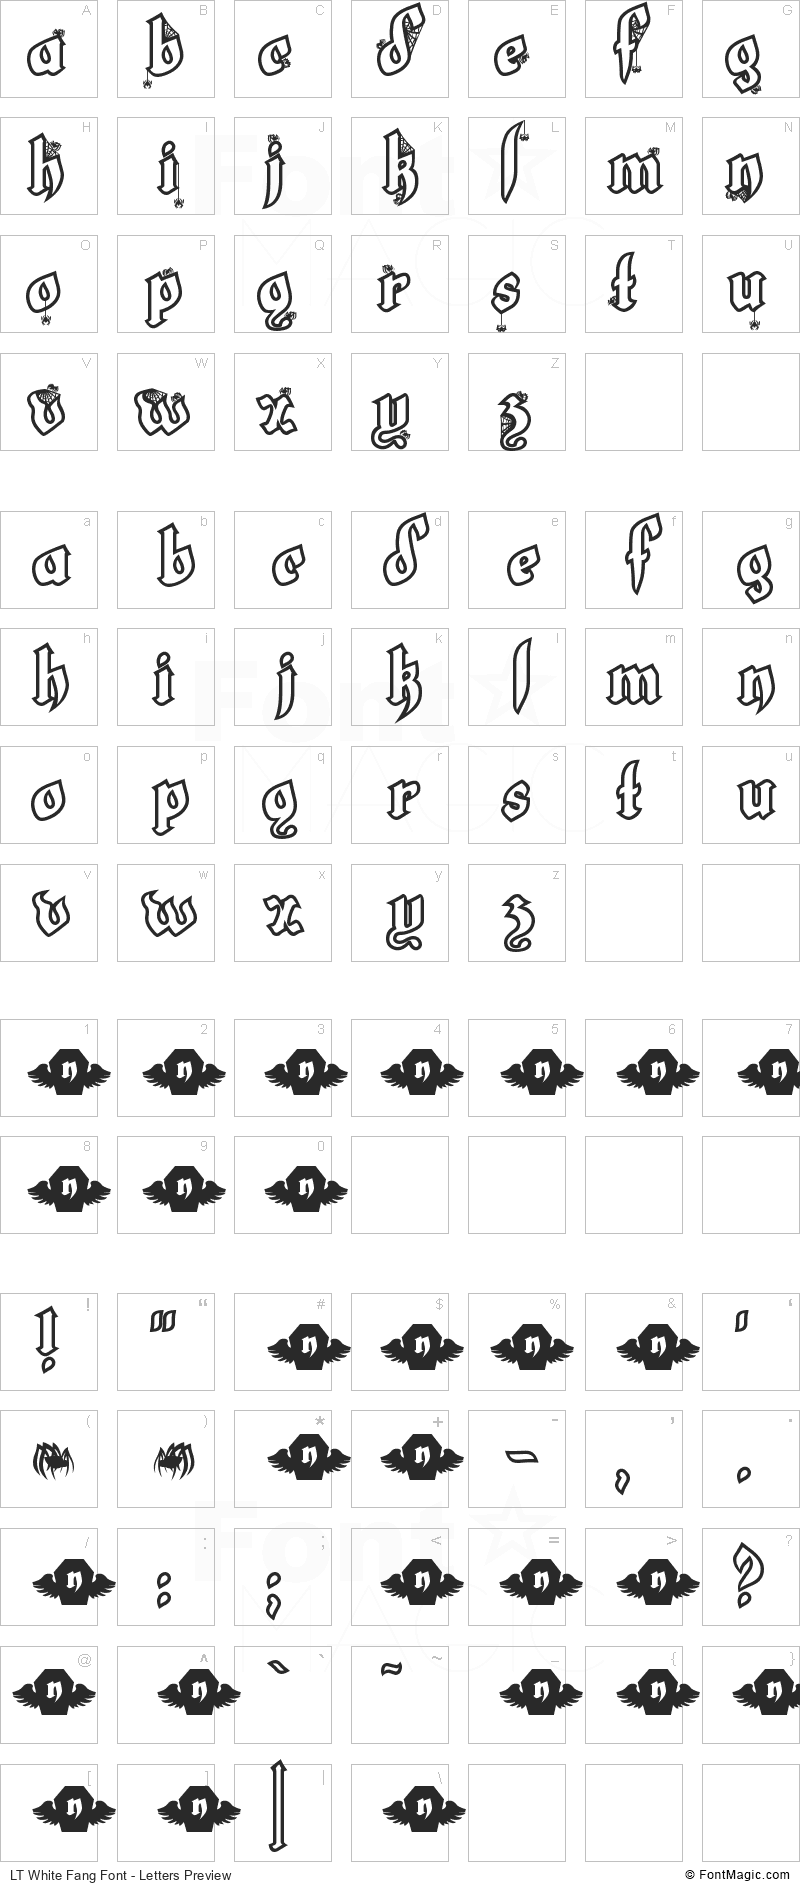 LT White Fang Font - All Latters Preview Chart